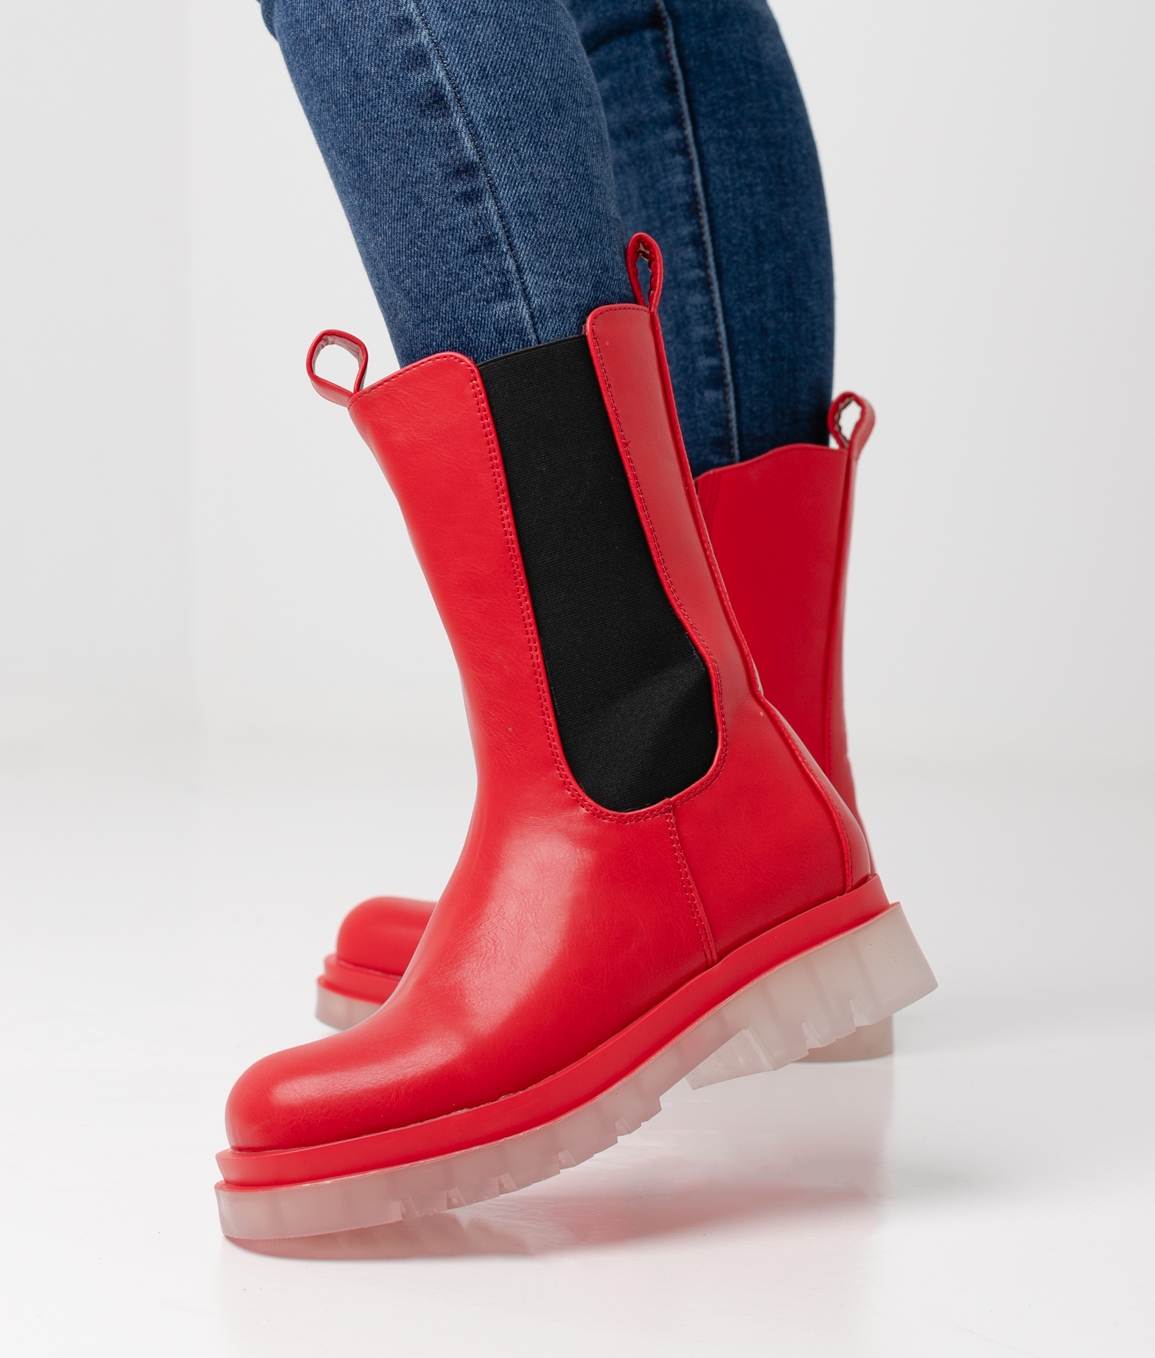 DOLIN BOOT - RED